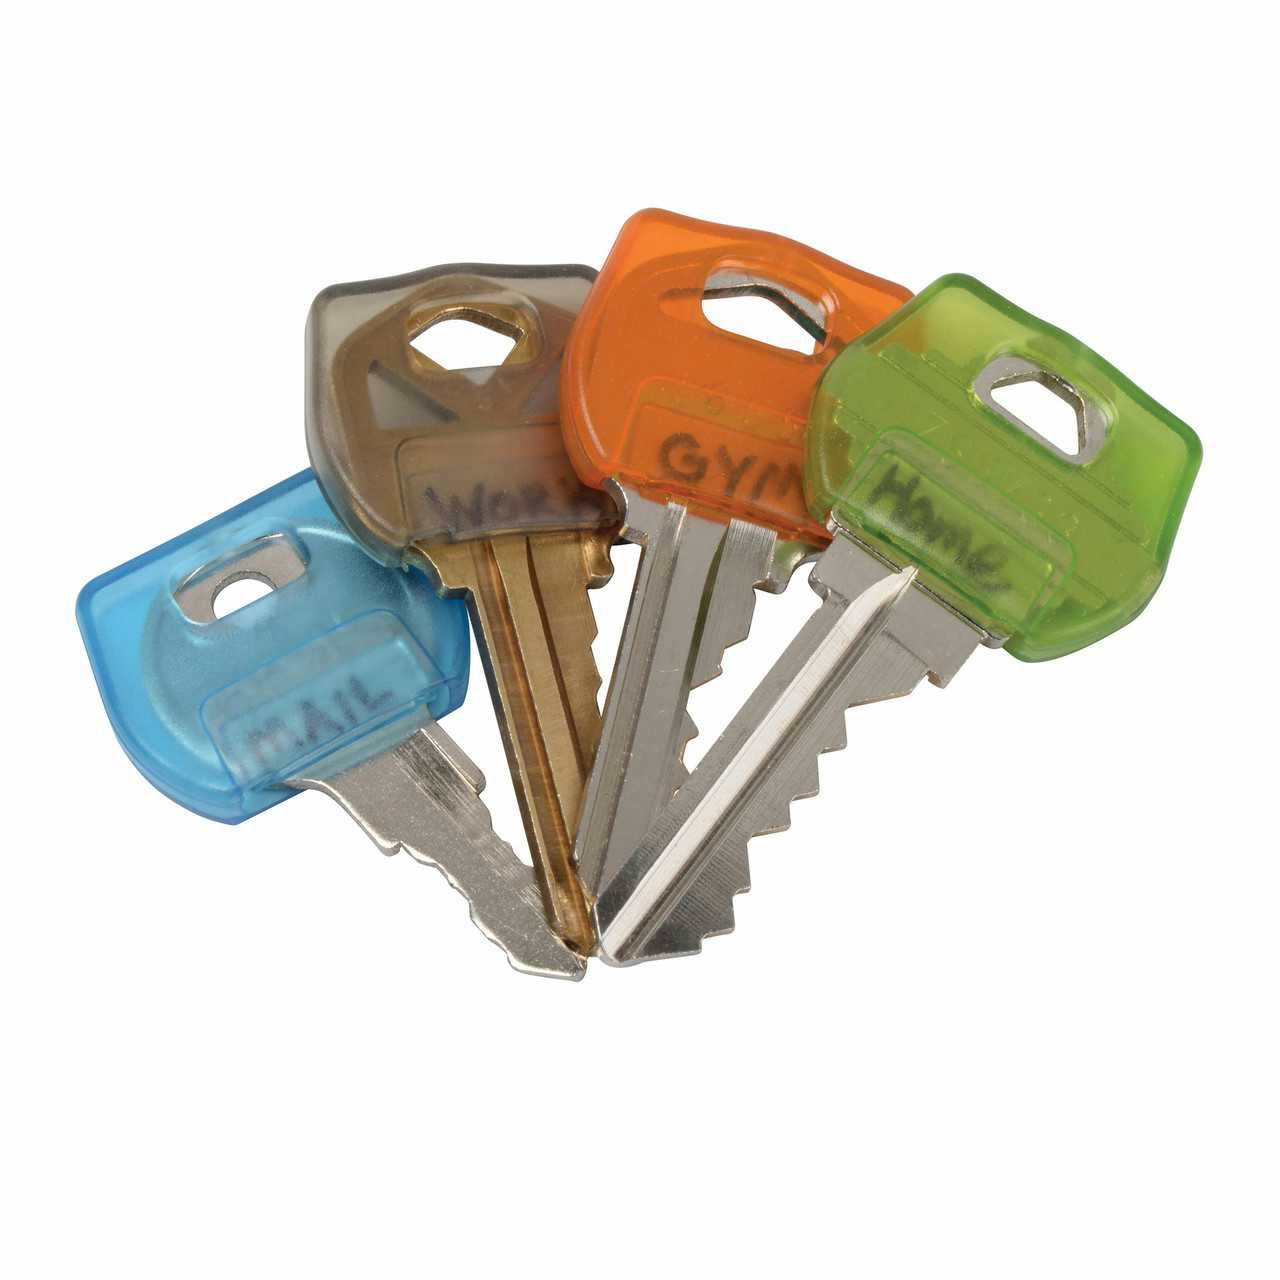 IdentiKey Covers (4 Pack) Assorted